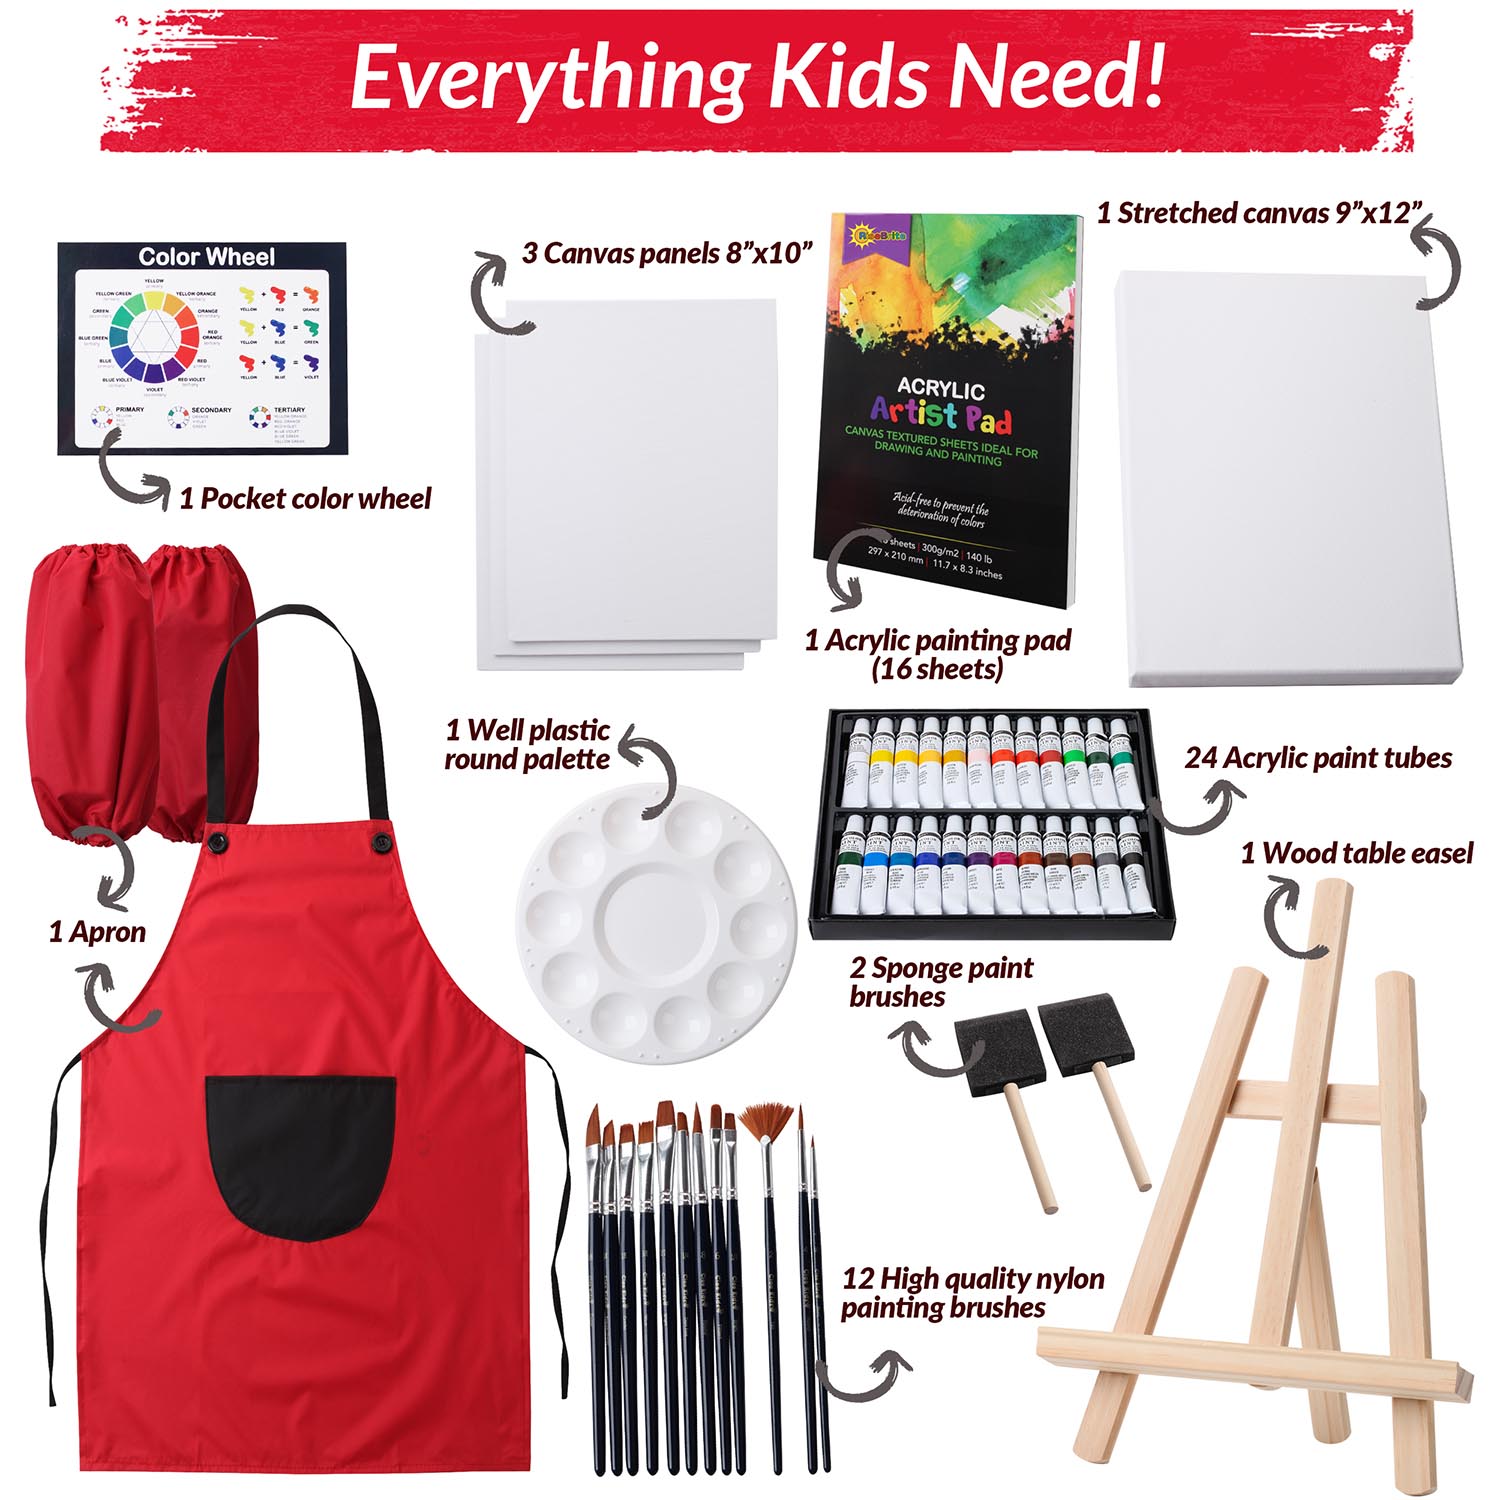 RiseBrite Kids Art Sets Come With Everything They Need To Get Started Acrylic Painting